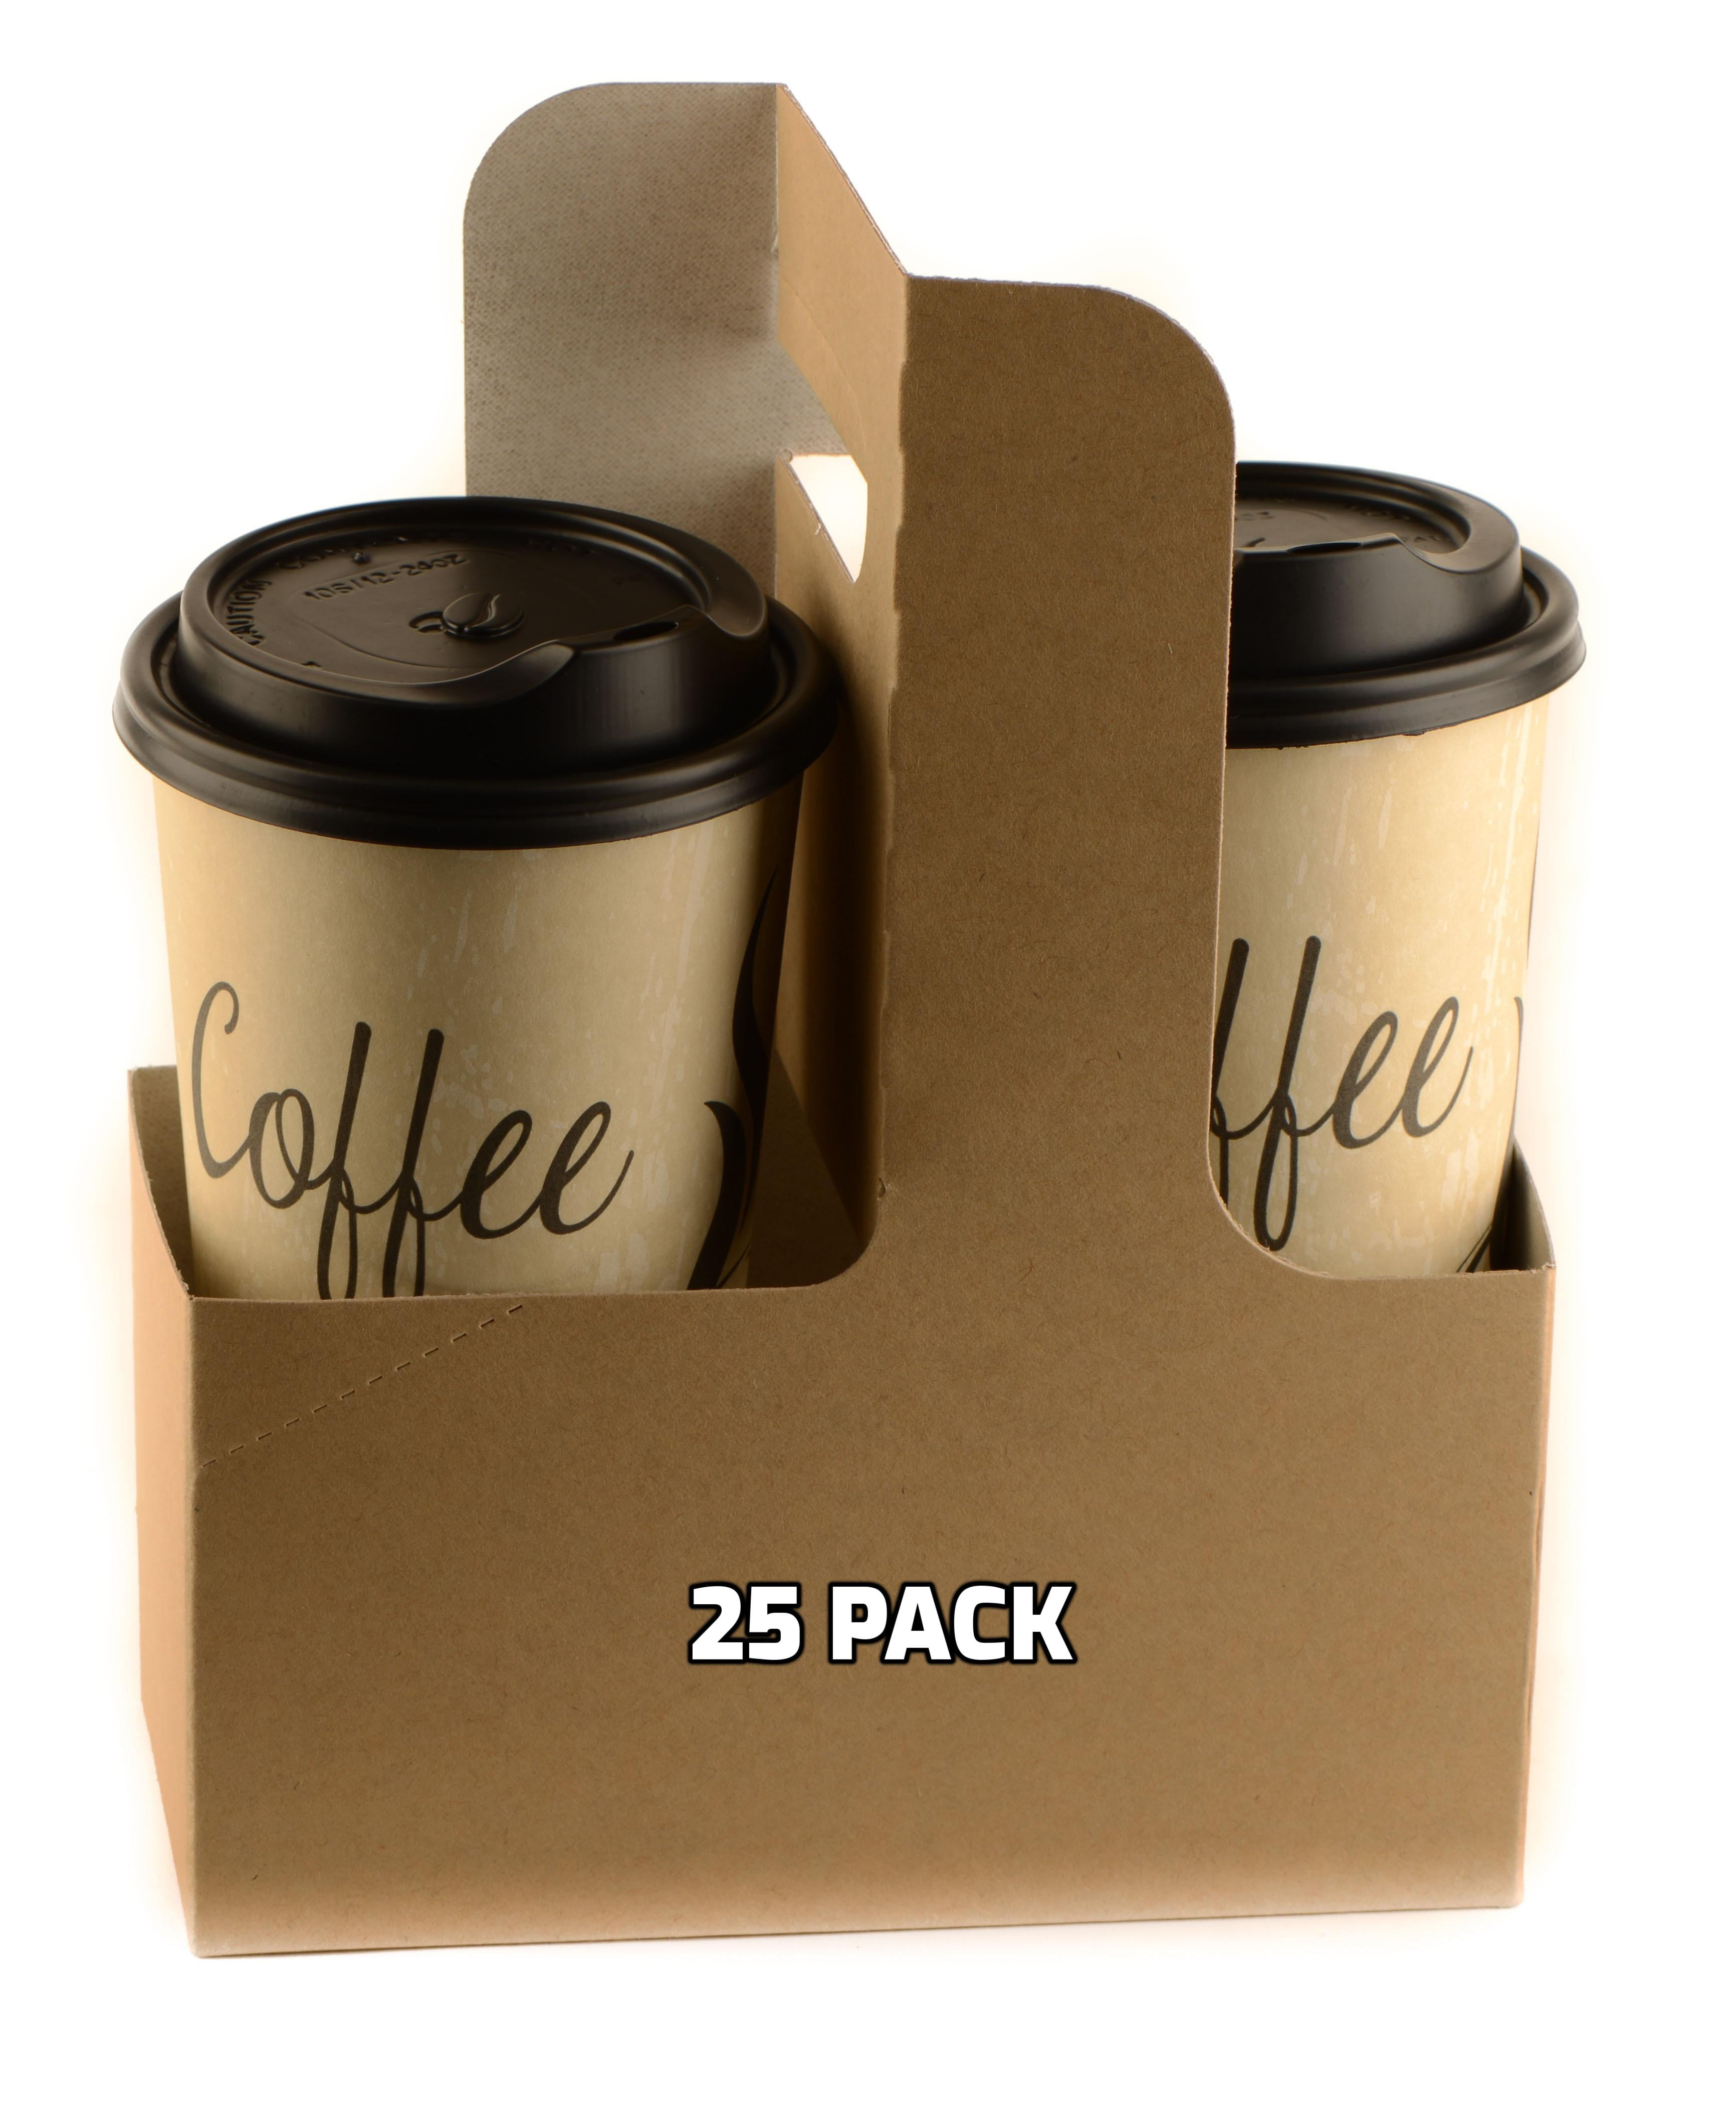 Adorila 2 Pack Anti Spill Drink Carrier, Unspillable Cup Carrier